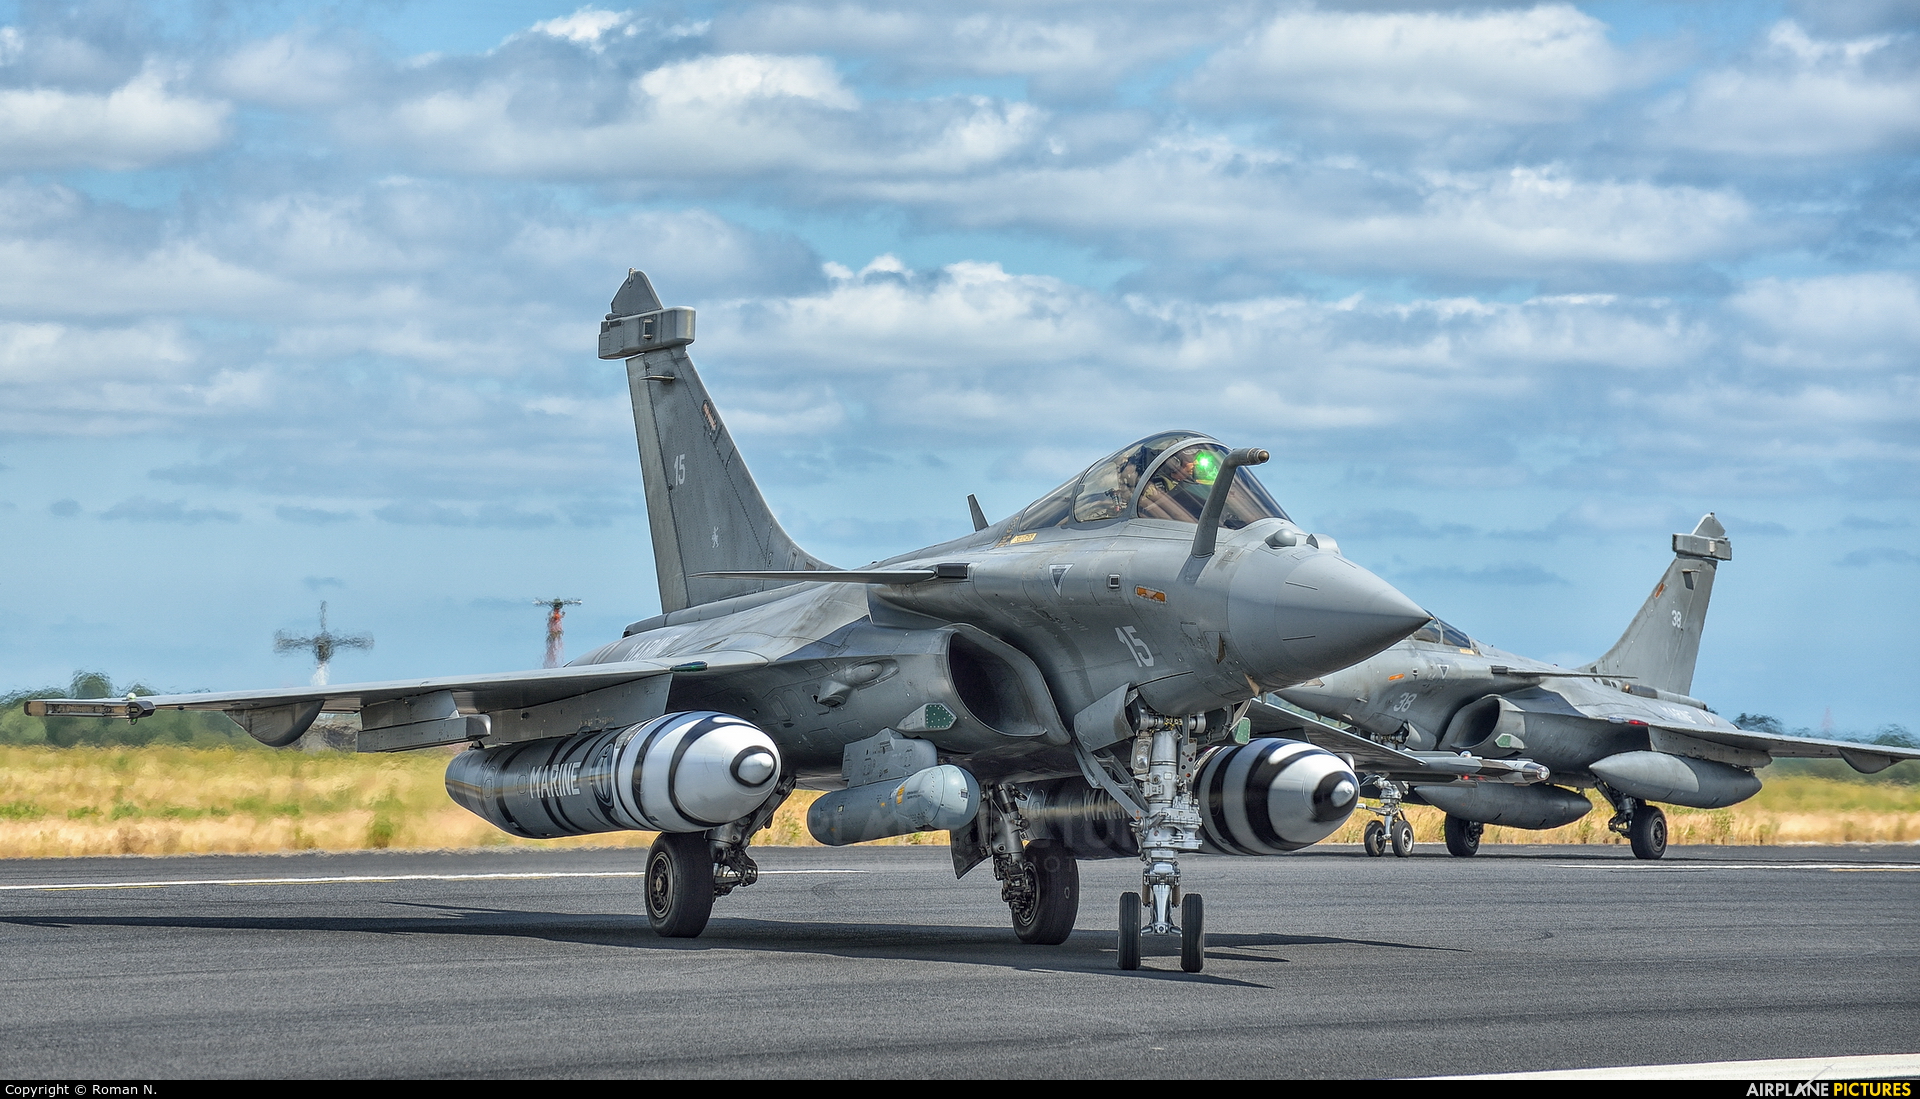        Dassualt's RAFALE-C Onmirole Strike Jet Fighter
The French have offered complete (100%) Transfer Of Technology for manufacture & the source code for the Active Electronic Scanned Array (AESA) Radar; if the RAFALE-C is selected by India for the MMRCA for the IAF